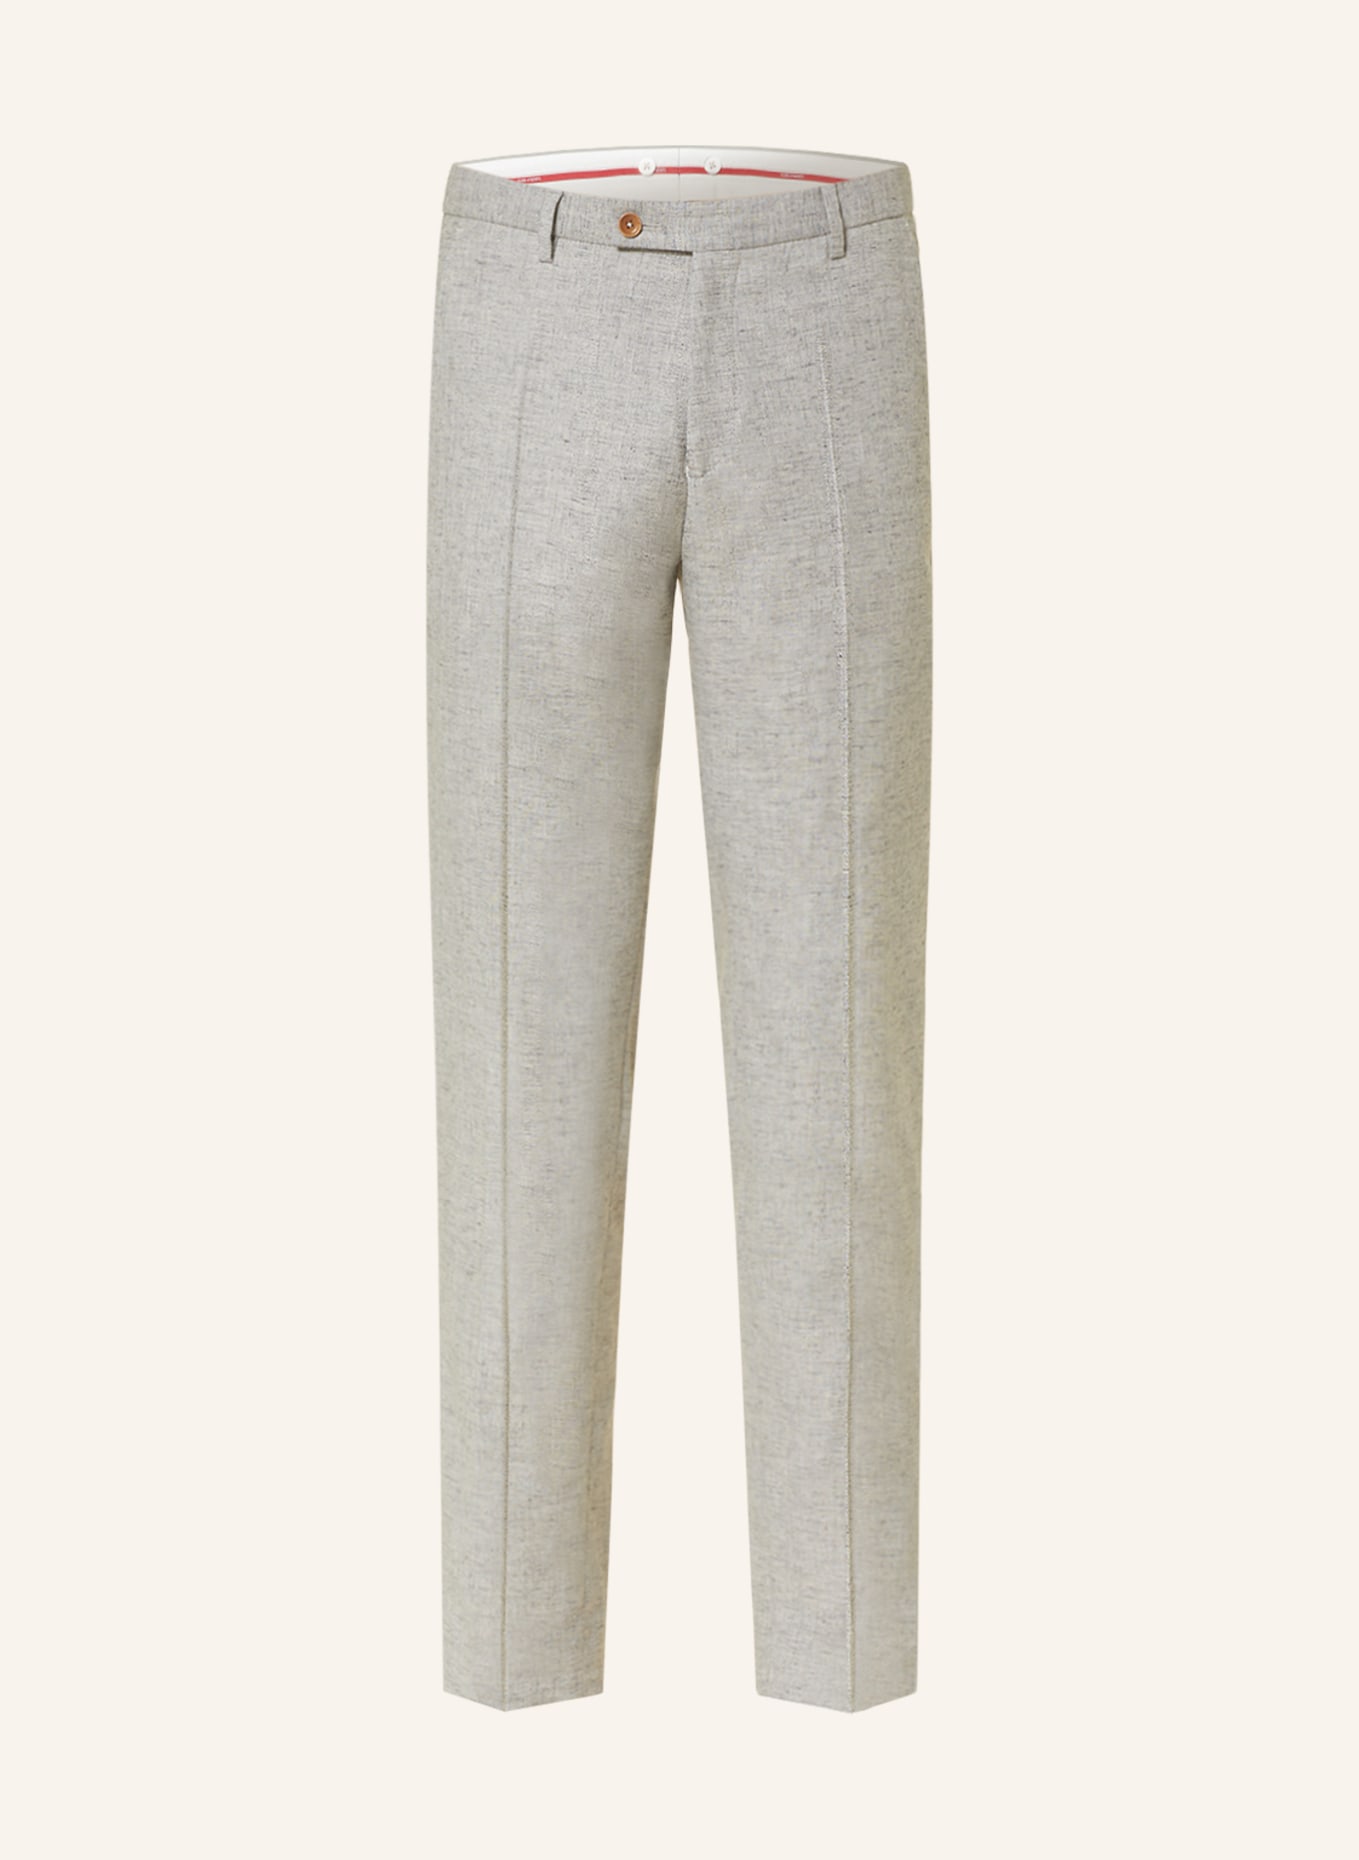 CG - CLUB of GENTS Suit trousers CG PACO slim fit, Color: LIGHT GRAY (Image 1)